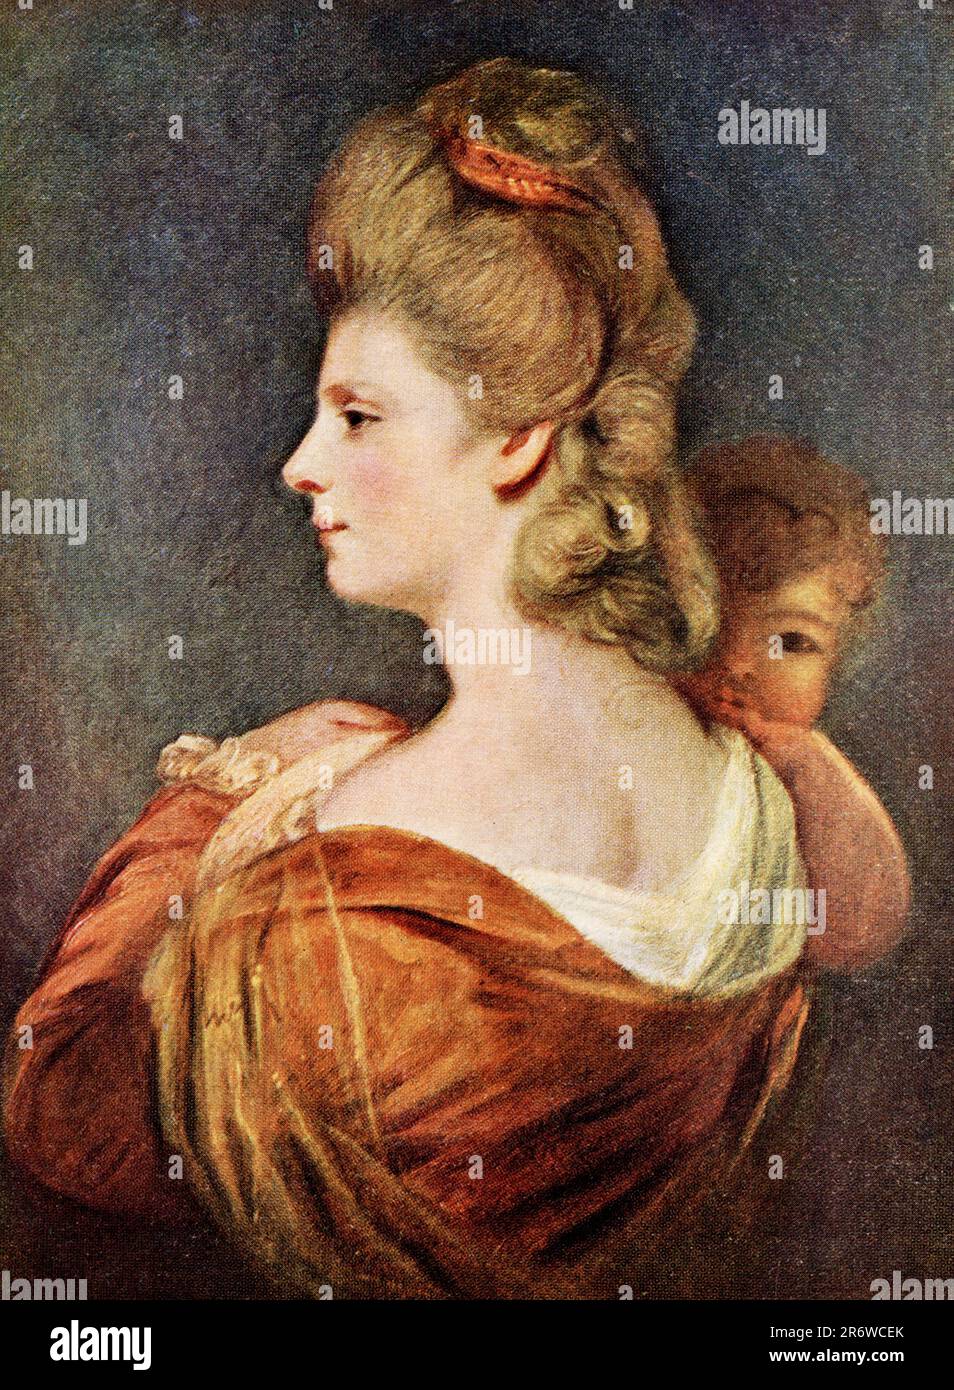 The early 1900s caption reads: 'Portrait of Lady and Child by Reynolds (1723-1792) in the National Gallery. This portrait was purchased in 1871 with the Peel collection and is said to represent the Hon Mrs Musters and her son. The composition does not show Sir Joshua at his best, and the painting is perhaps rather thin. The identity is not very clearly established, although the names of Mr. and Mrs. Musters are to be found in Sir Joshua’s account books.' Joshua Reynolds (1723-1792) was the leading English portraitist of the 18th century. Through study of ancient and Italian Renaissance art, an Stock Photo